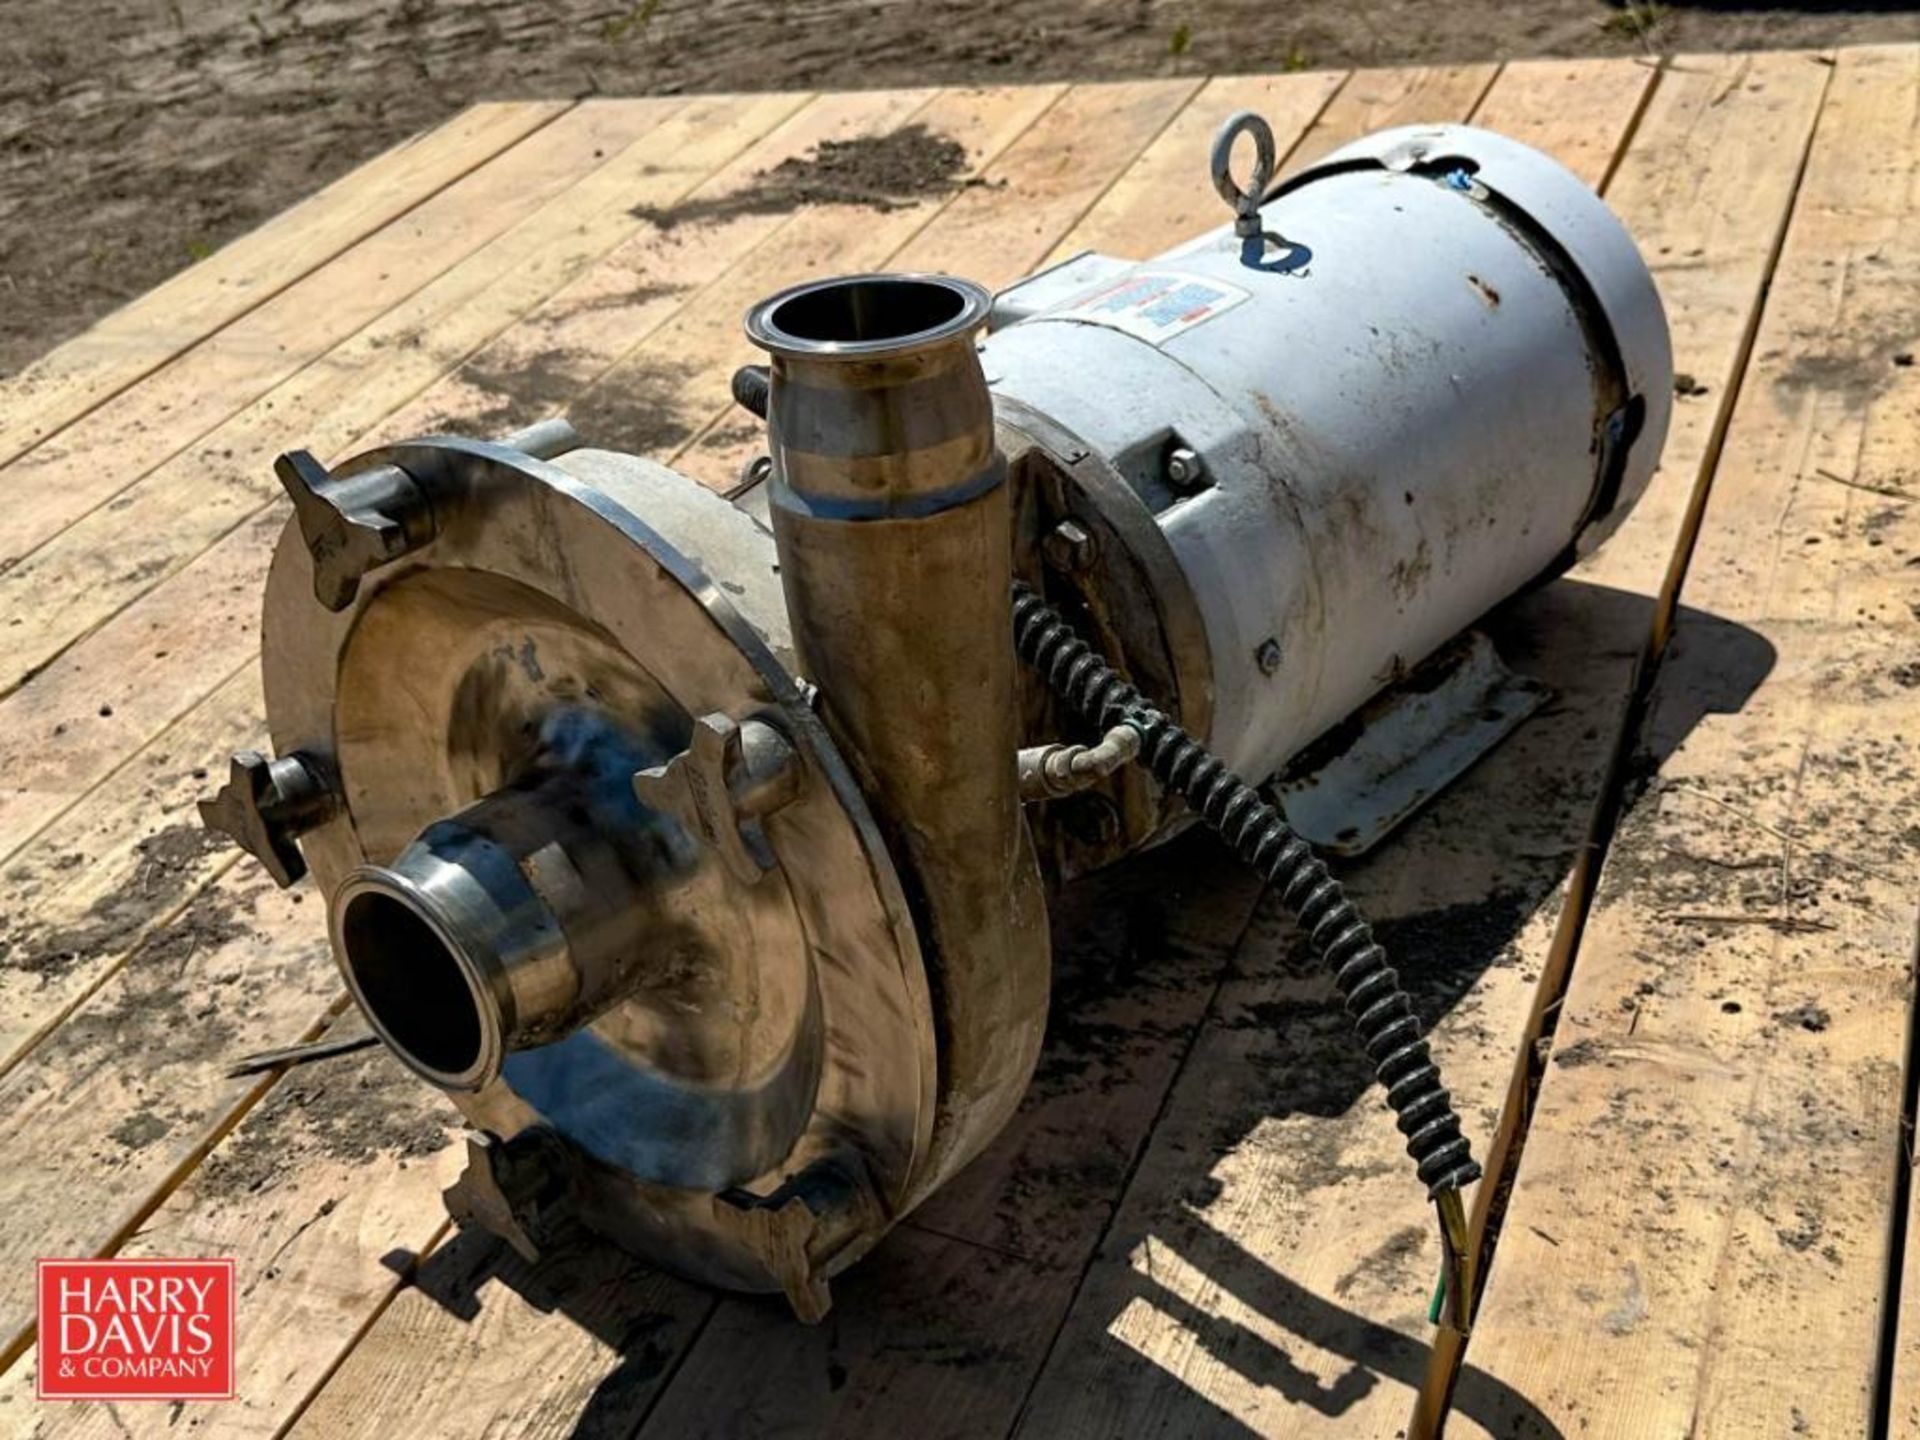 Fristam Centrifugal Pump with 5 HP Motor - Rigging Fee: $75 - Image 2 of 4